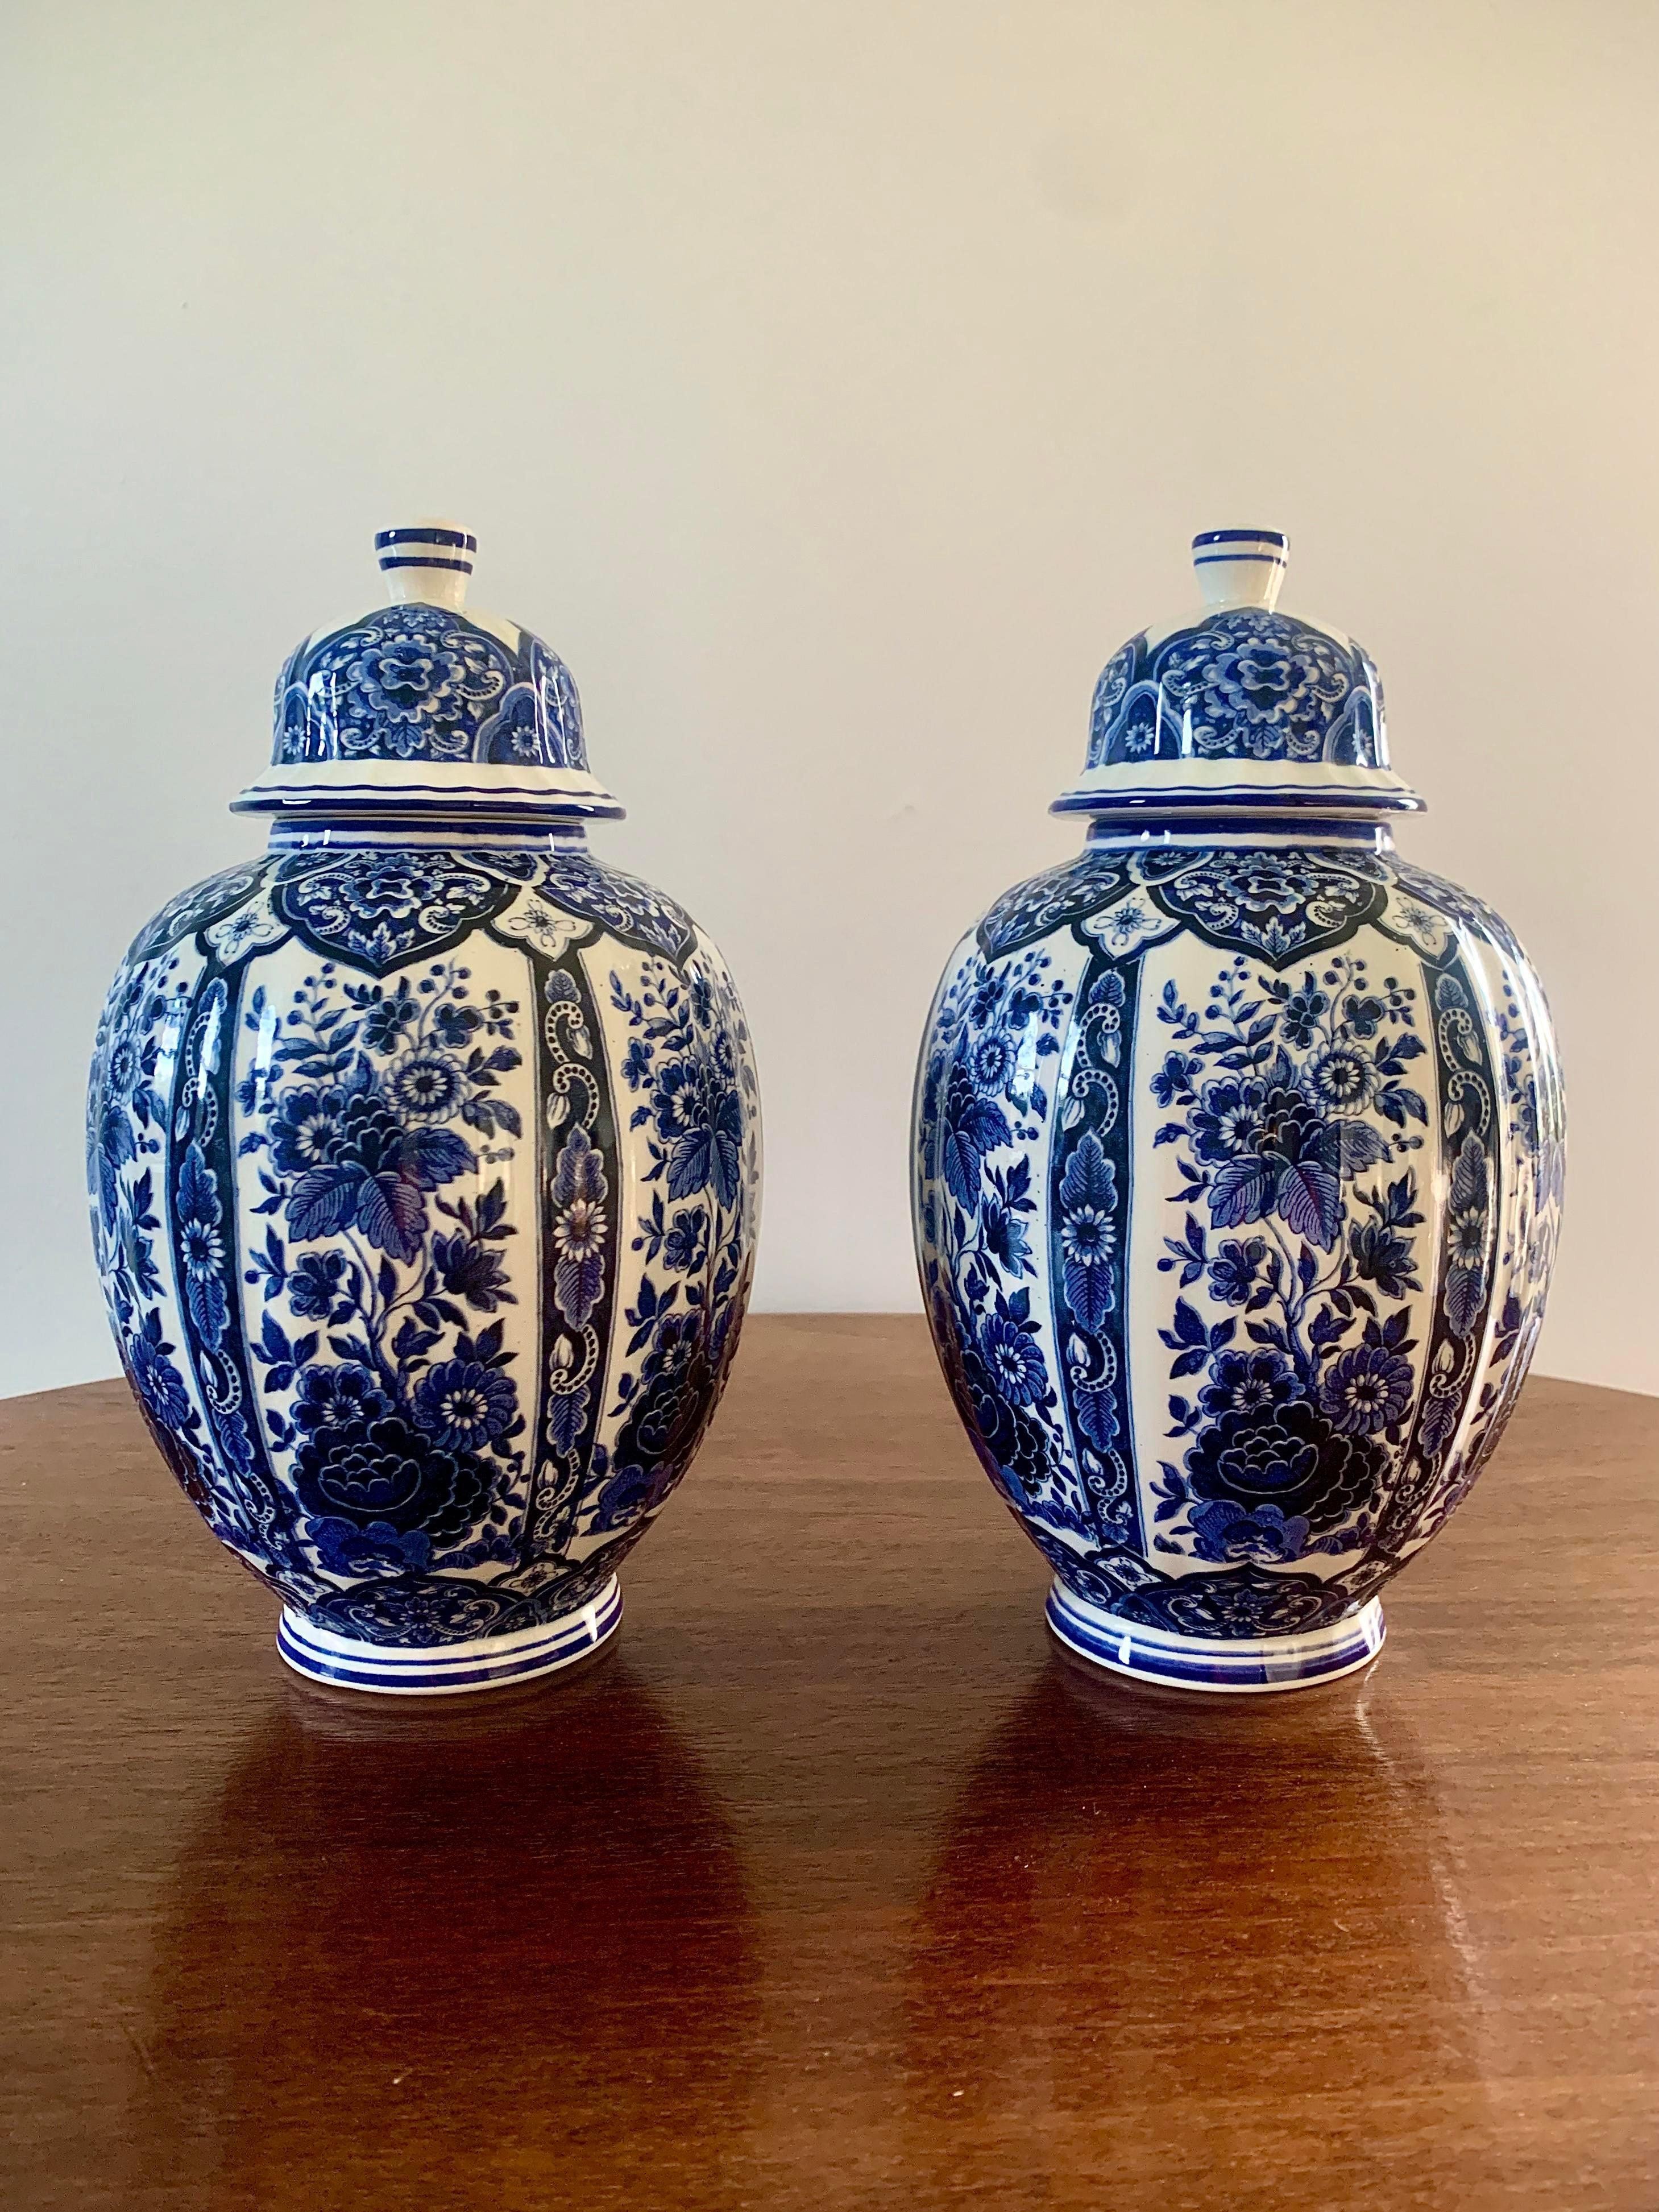 Chinoiserie Italian Blue and White Porcelain Ginger Jars by Ardalt Blue Delfia, Pair